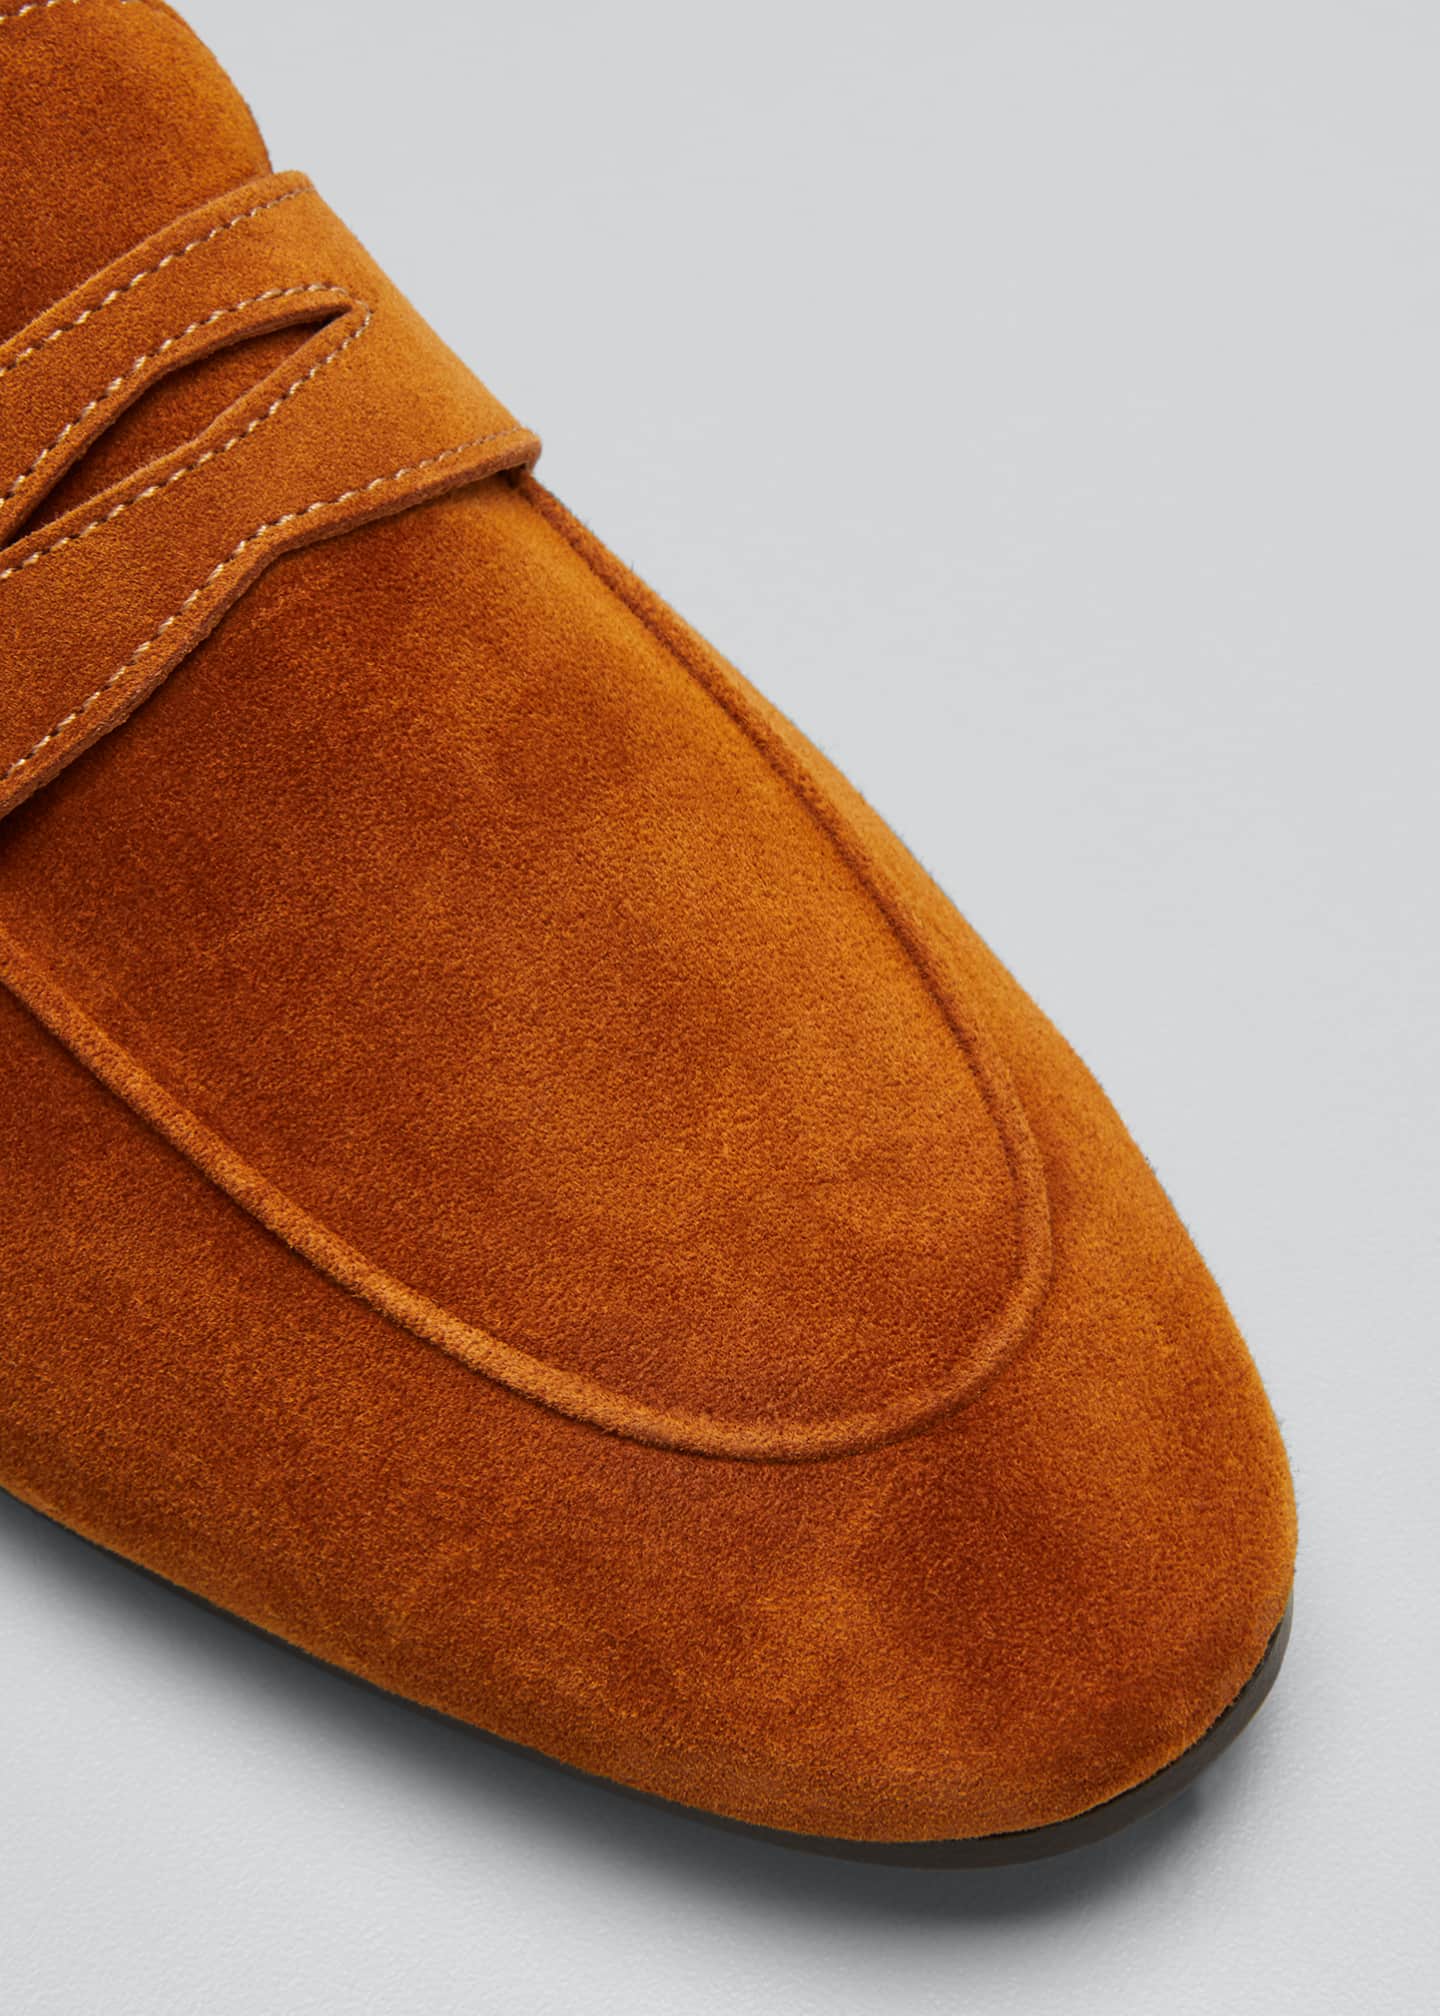 Bougeotte Flaneur Soft Suede Loafers - Bergdorf Goodman